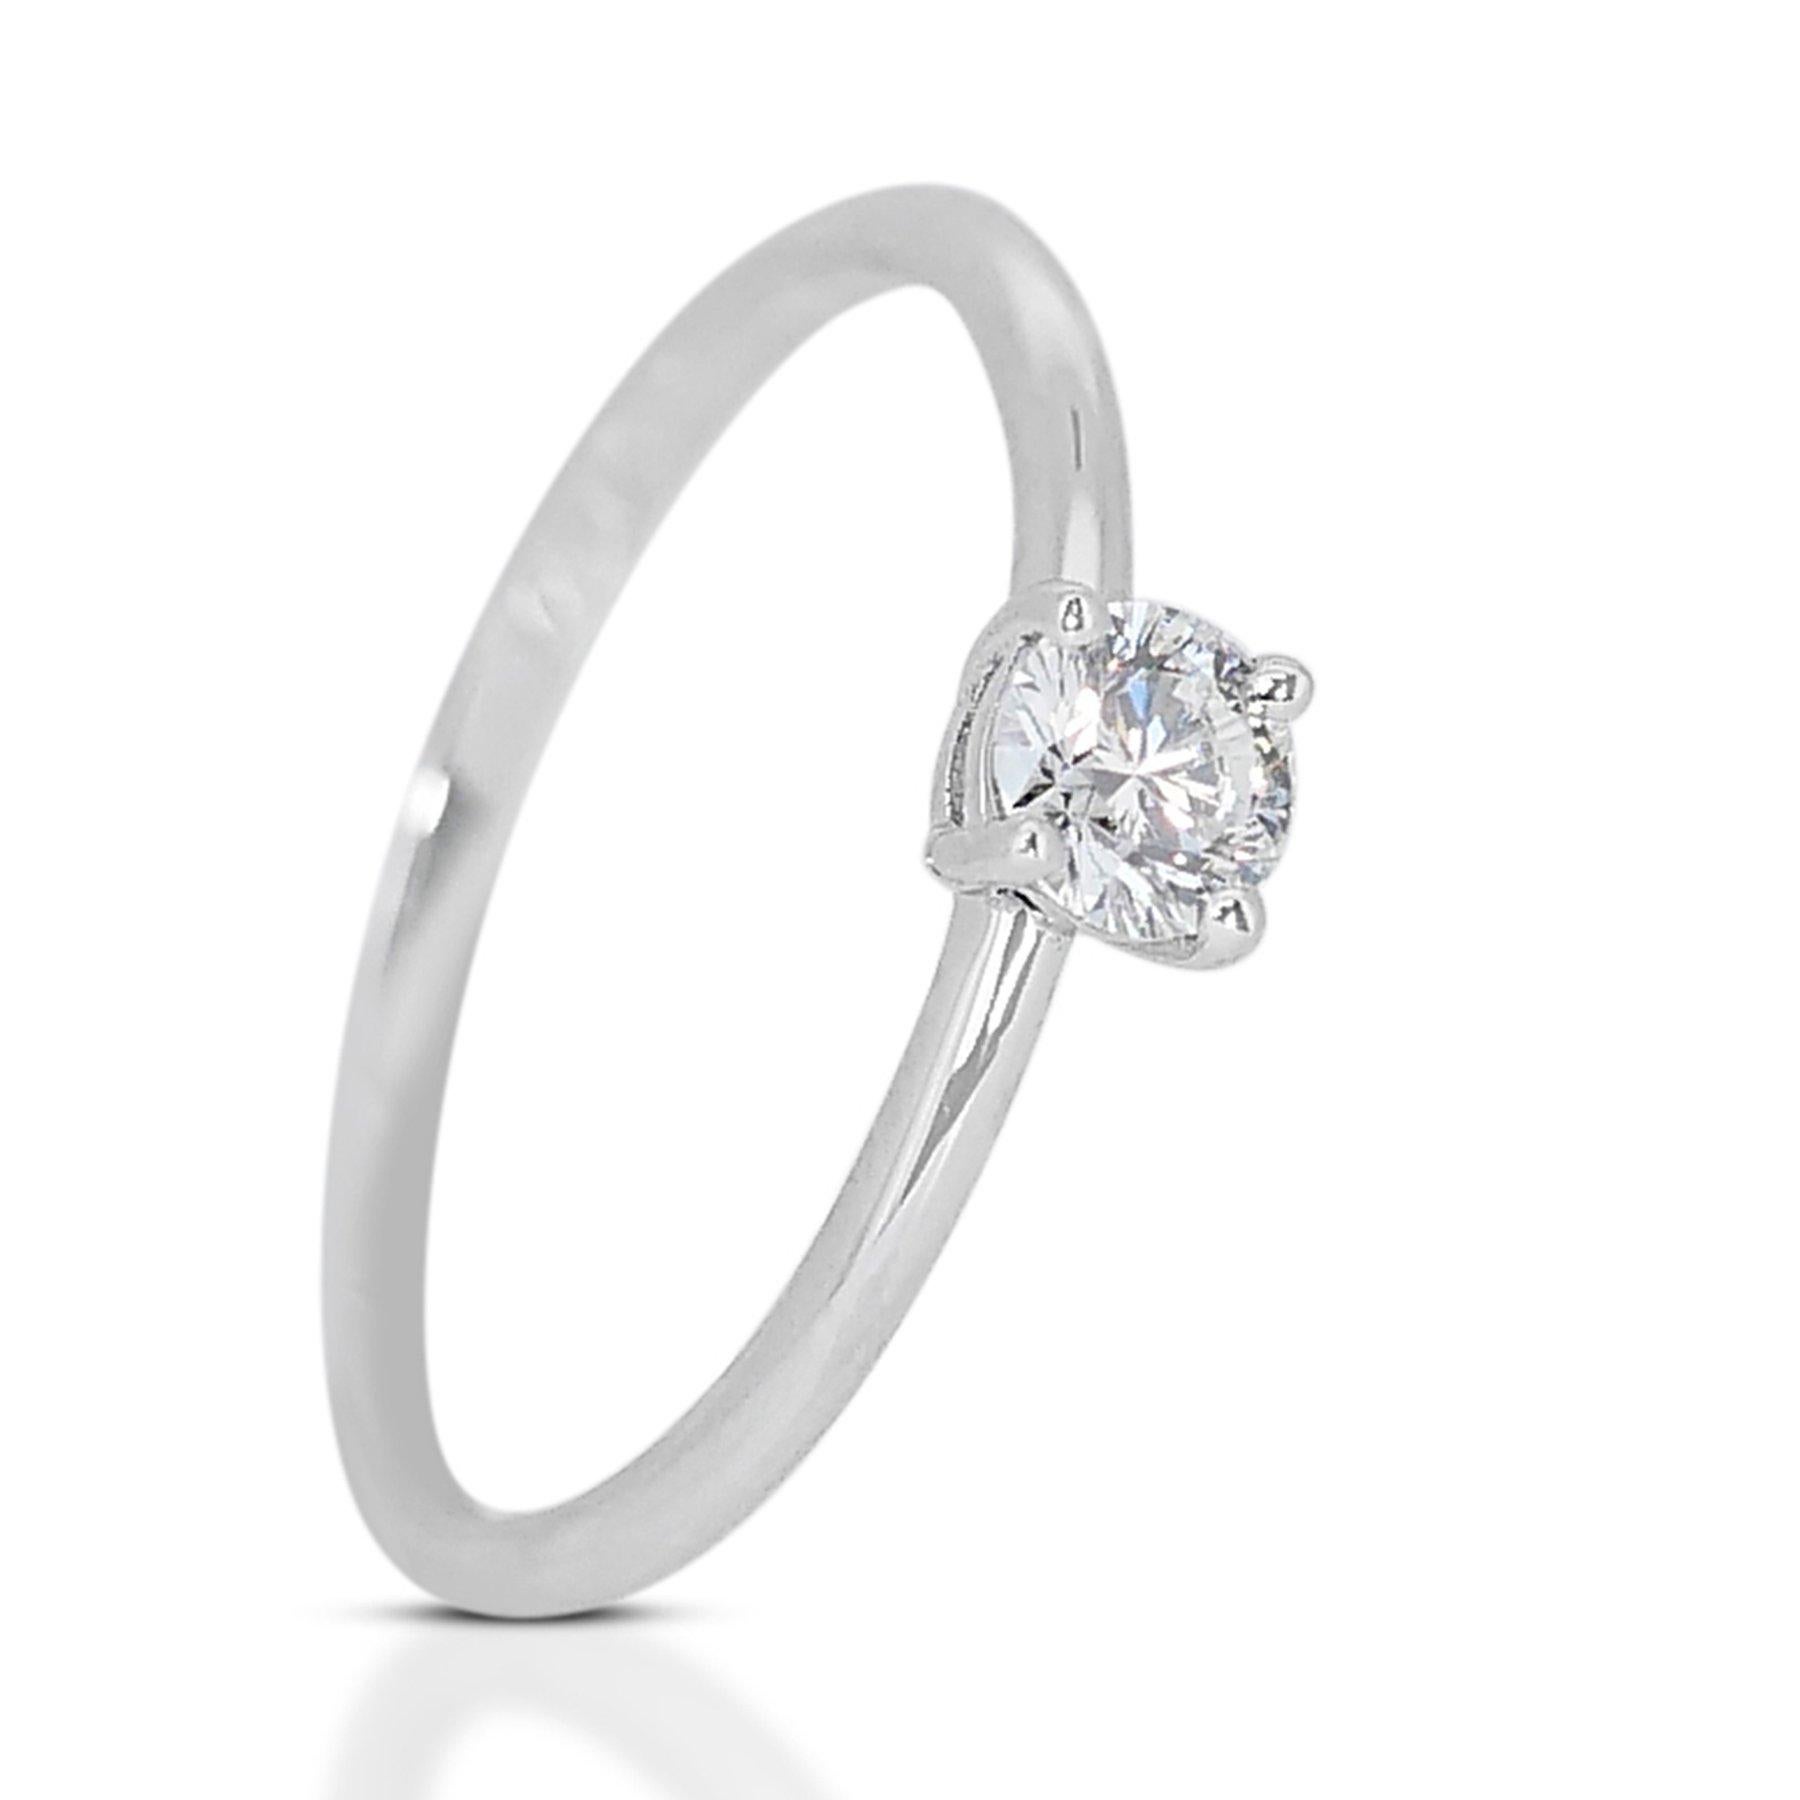 Women's Classic 0.70ct Diamond Solitaire Ring in 18k White Gold - GIA Certified For Sale